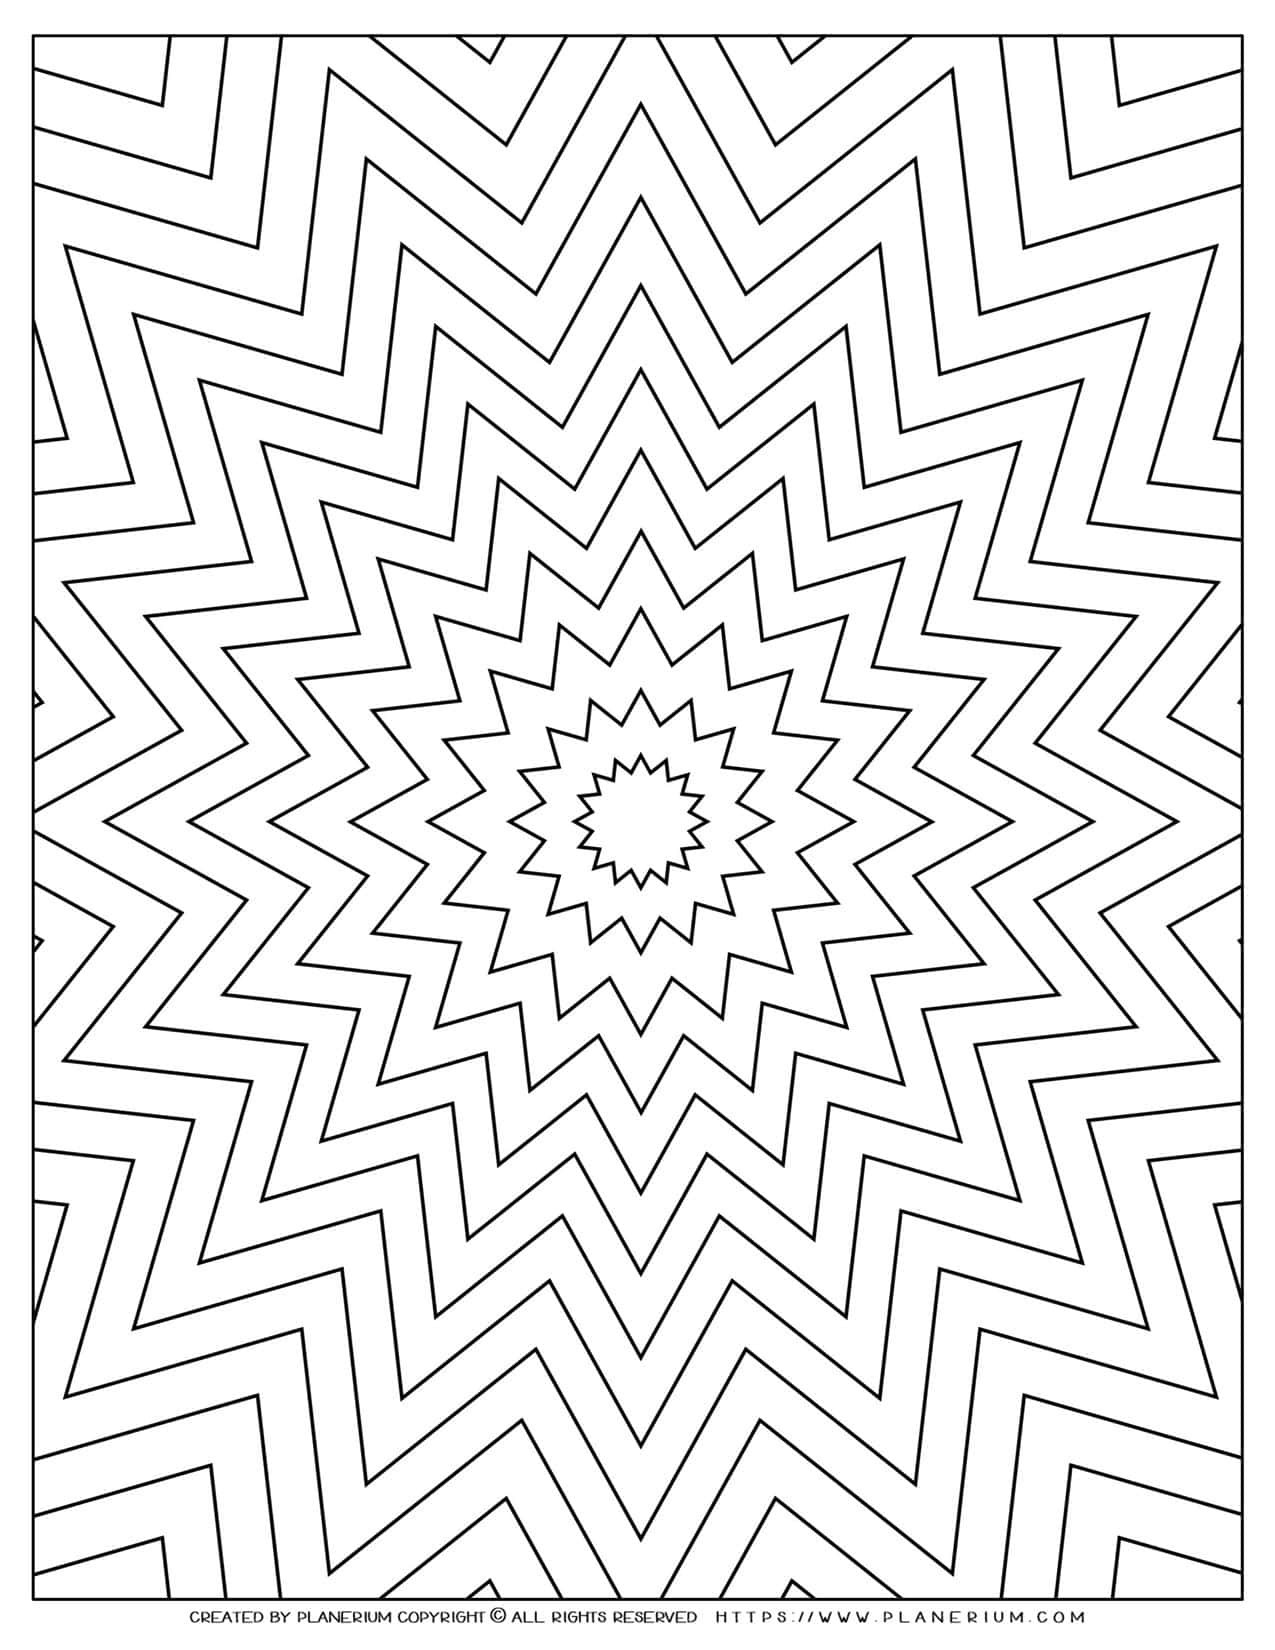 nested-star-coloring-page-geometric-design-free-printable-planerium